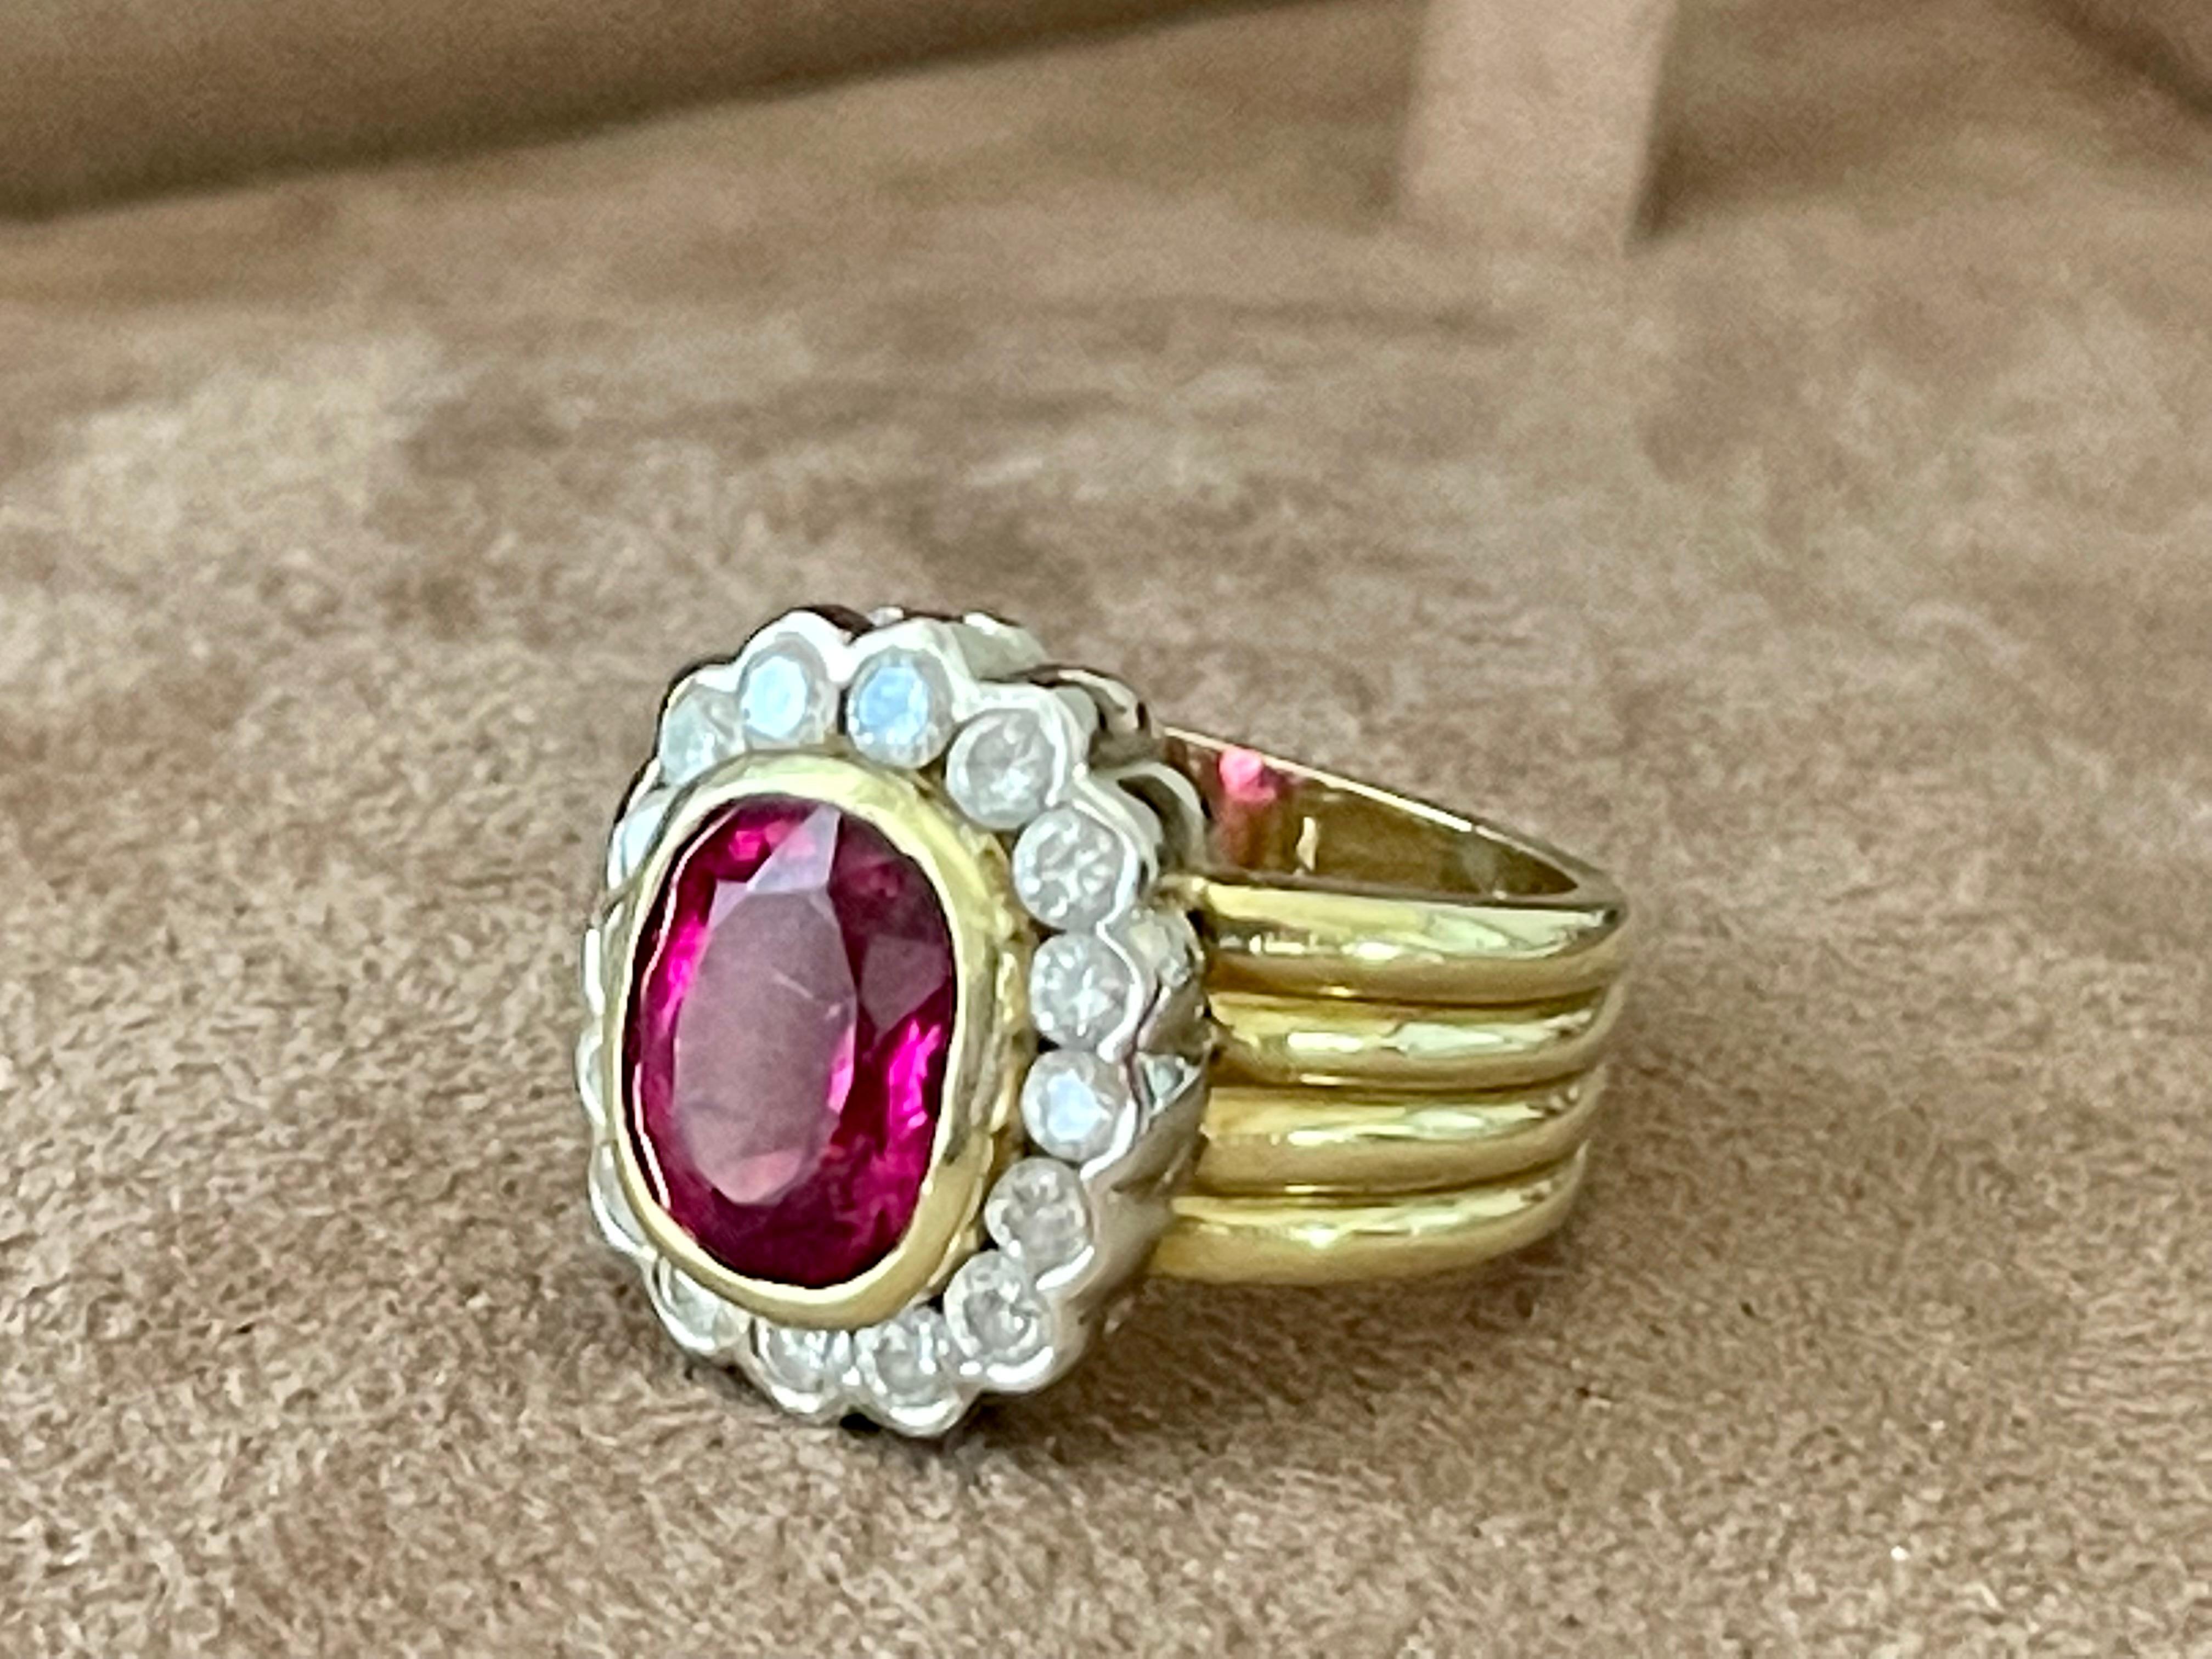 Gorgeous and solid 18 K yellow Gold and white Gold Ring featuring a lovely oval pink Tourmaline estimated ca. 4.50 ct., surrounded by 16 brilliant cut Diamonds weighing approximately 1.30 ct, H color, si clarity.
The ring is currently size 54/14